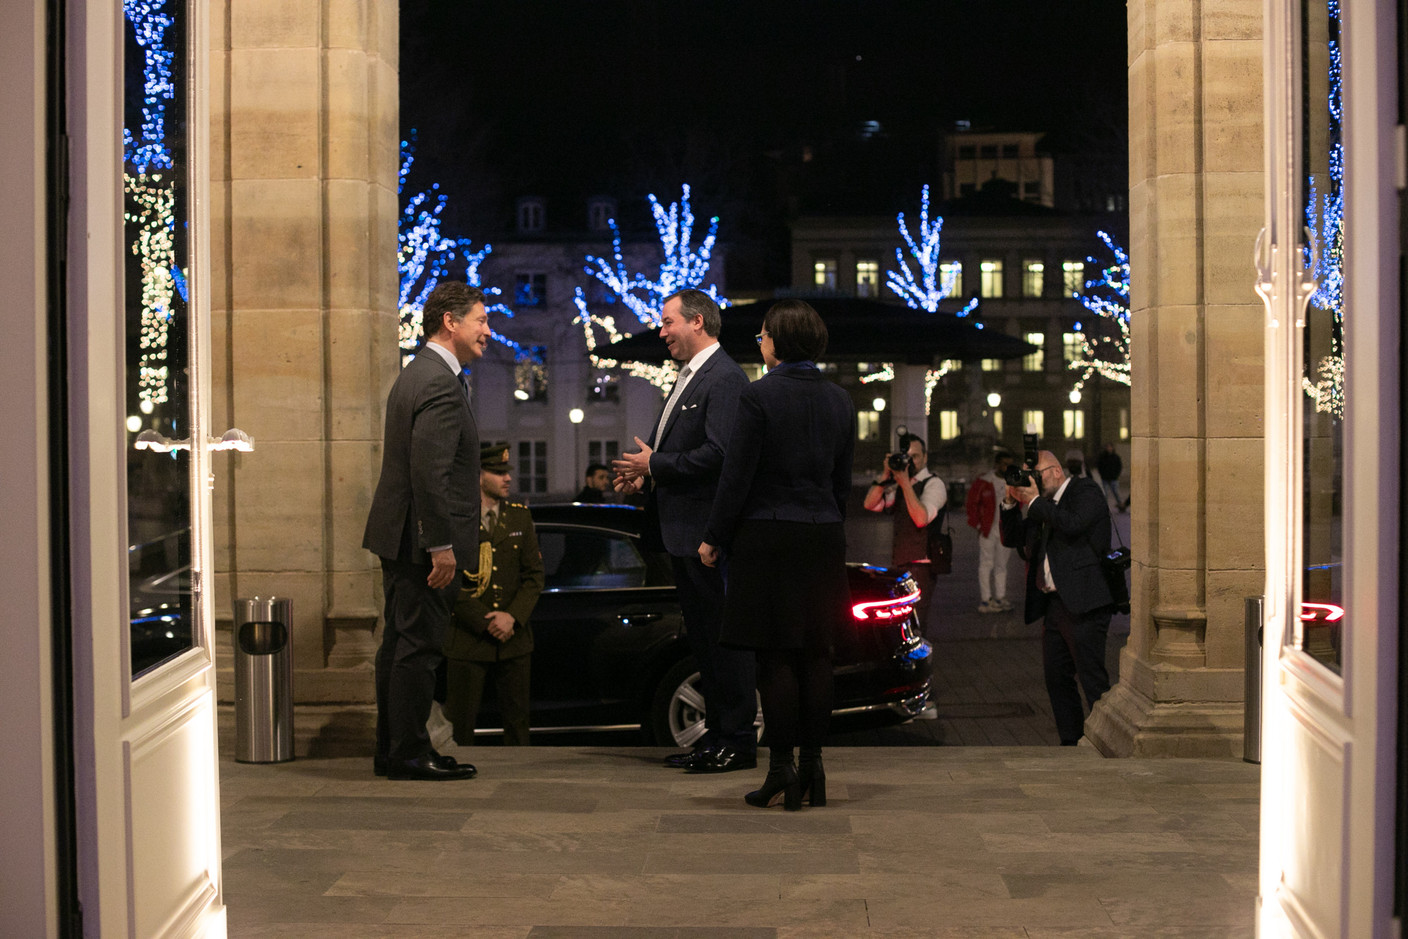 Crown Prince Guillaume is seen speaking with Nicolas Mackel of Luxembourg for Finance (left) and the finance minister Yuriko Backes (right) upon arrival at the Cercle Cité on the place d’Armes for LFF’s 15th anniversary reception, 20 February 2023. Photo: Matic Zorman/Maison Moderne